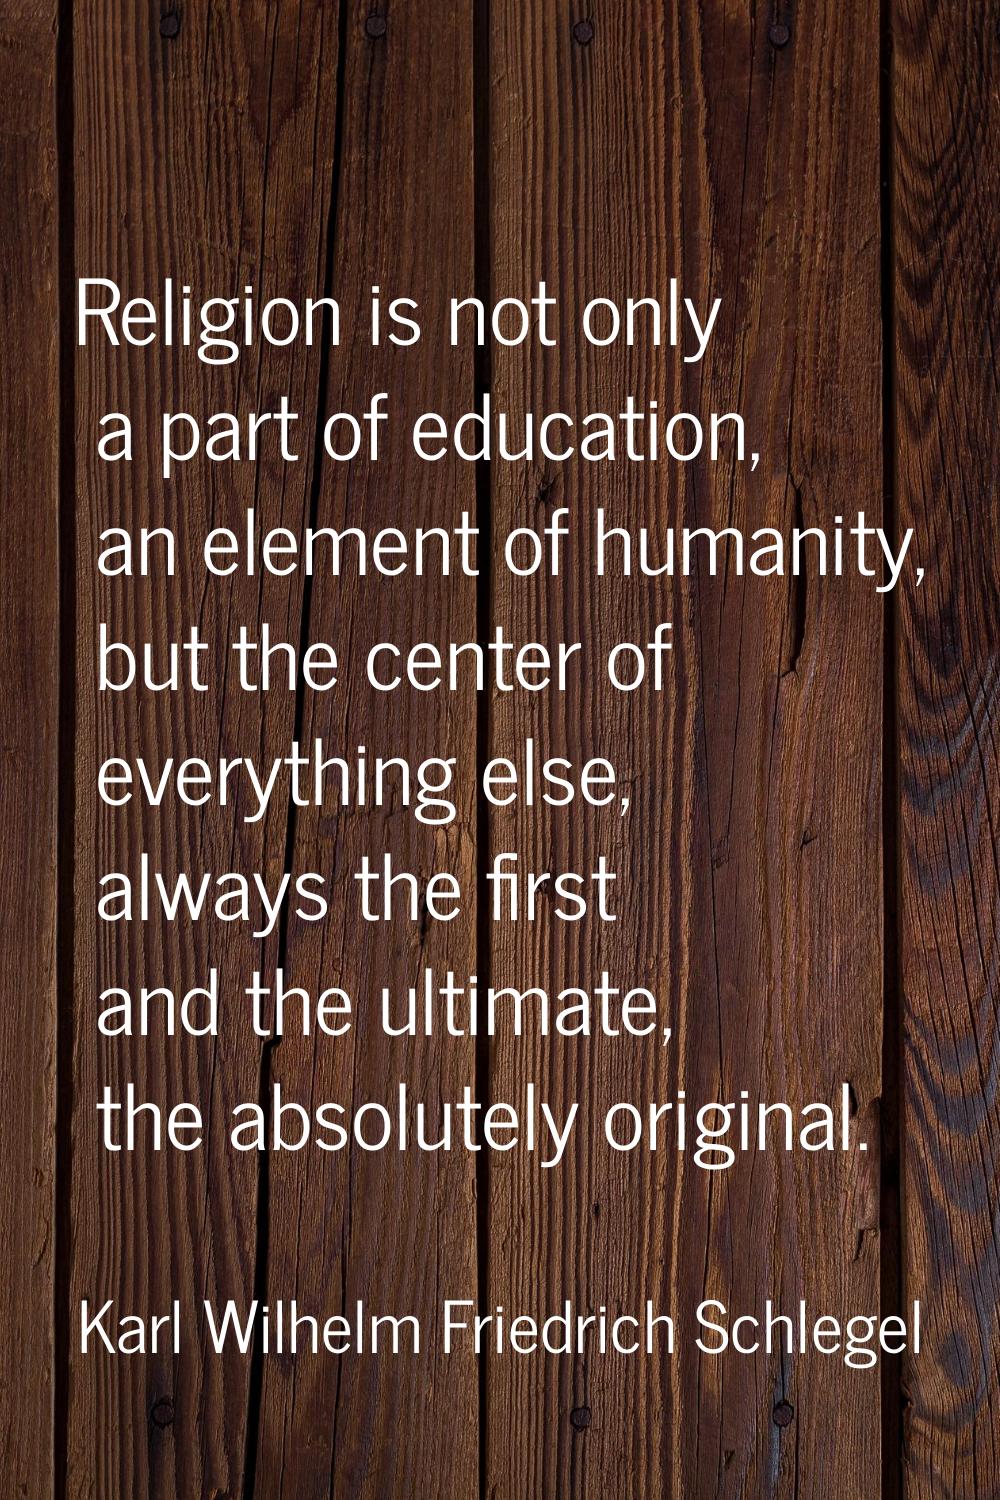 Religion is not only a part of education, an element of humanity, but the center of everything else